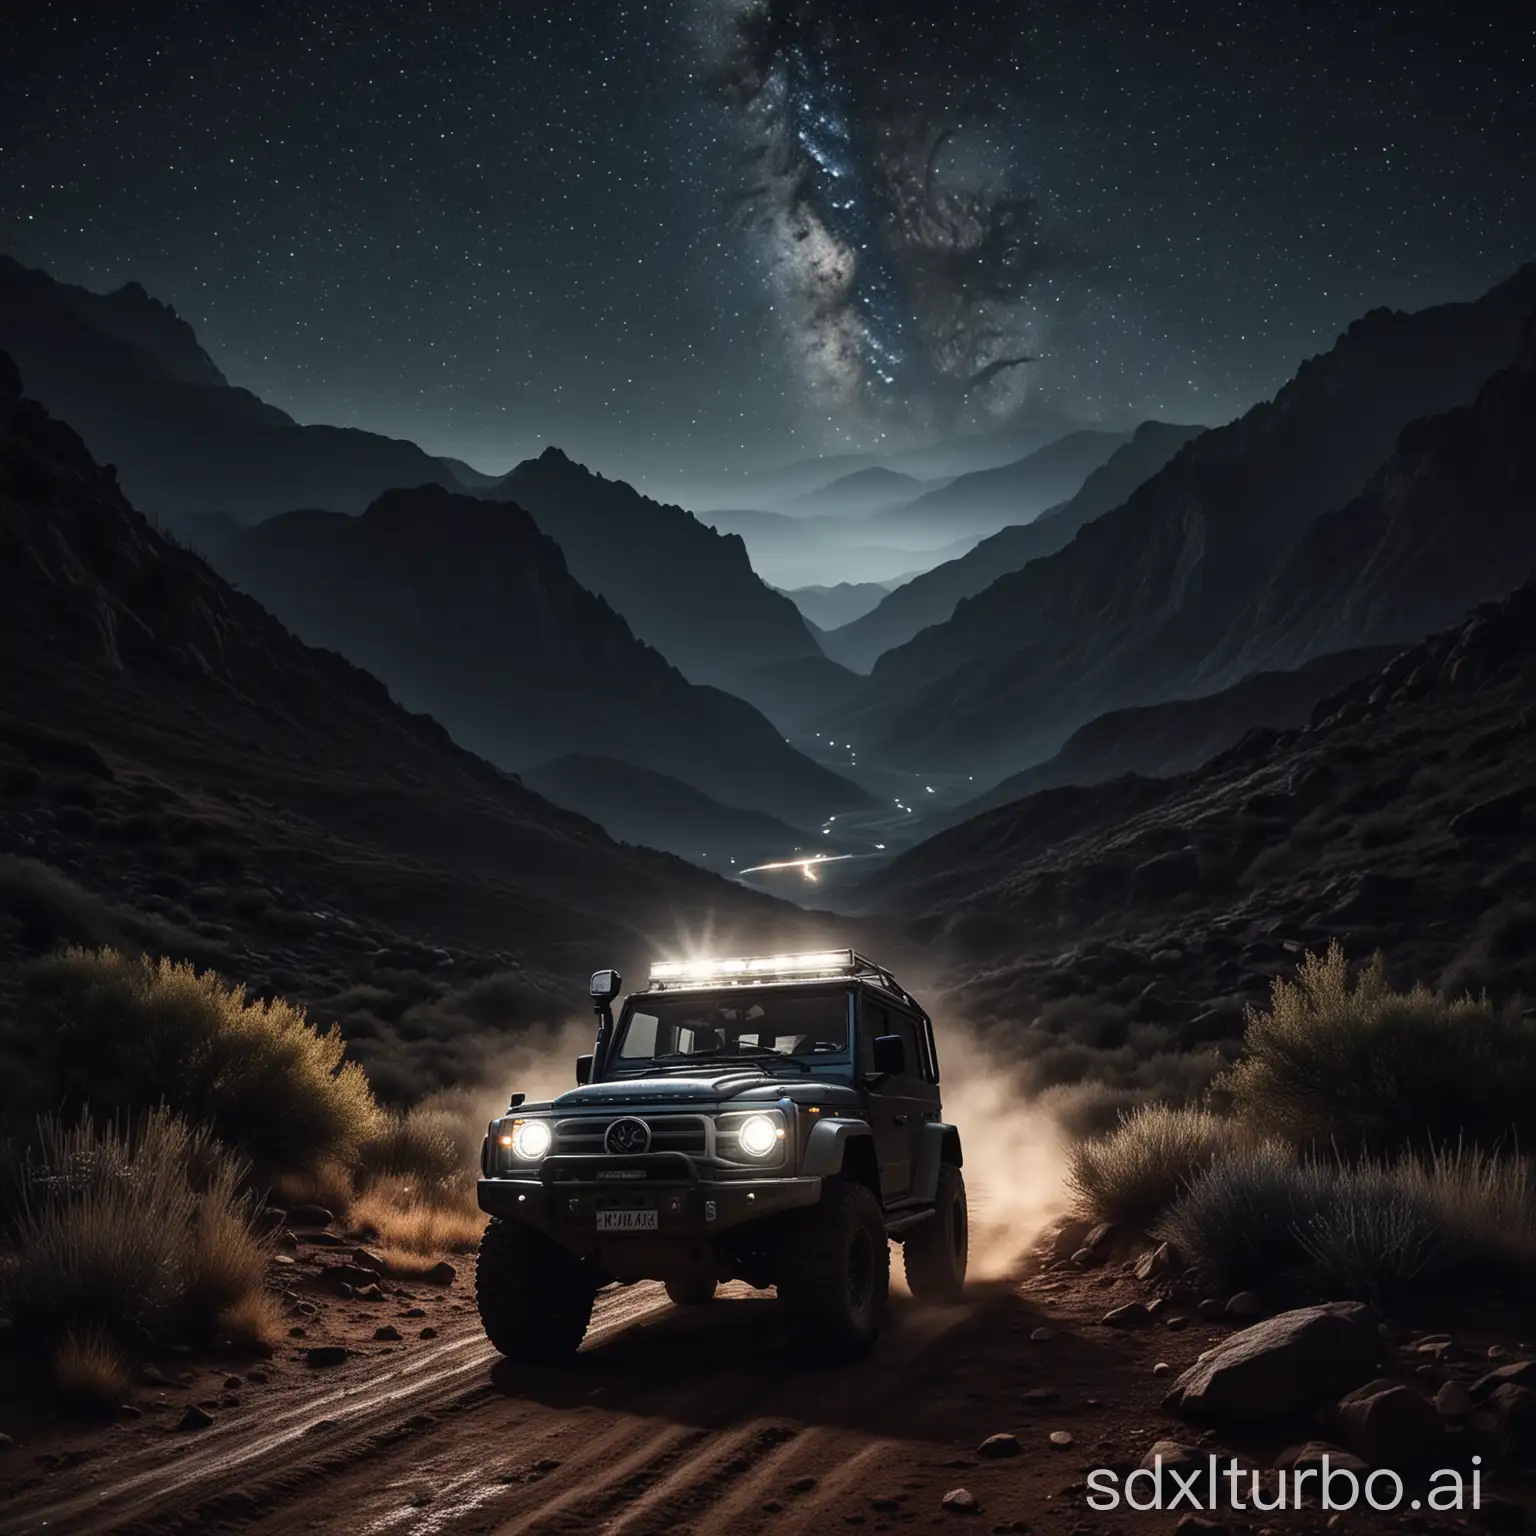 Under the starry sky, a off-road vehicle is traversing in the distance. The headlights draw two straight lines, illuminating the far-off area. The background is comprised of mountains, and the lighting is in dark tones, highlighting the details and textures.